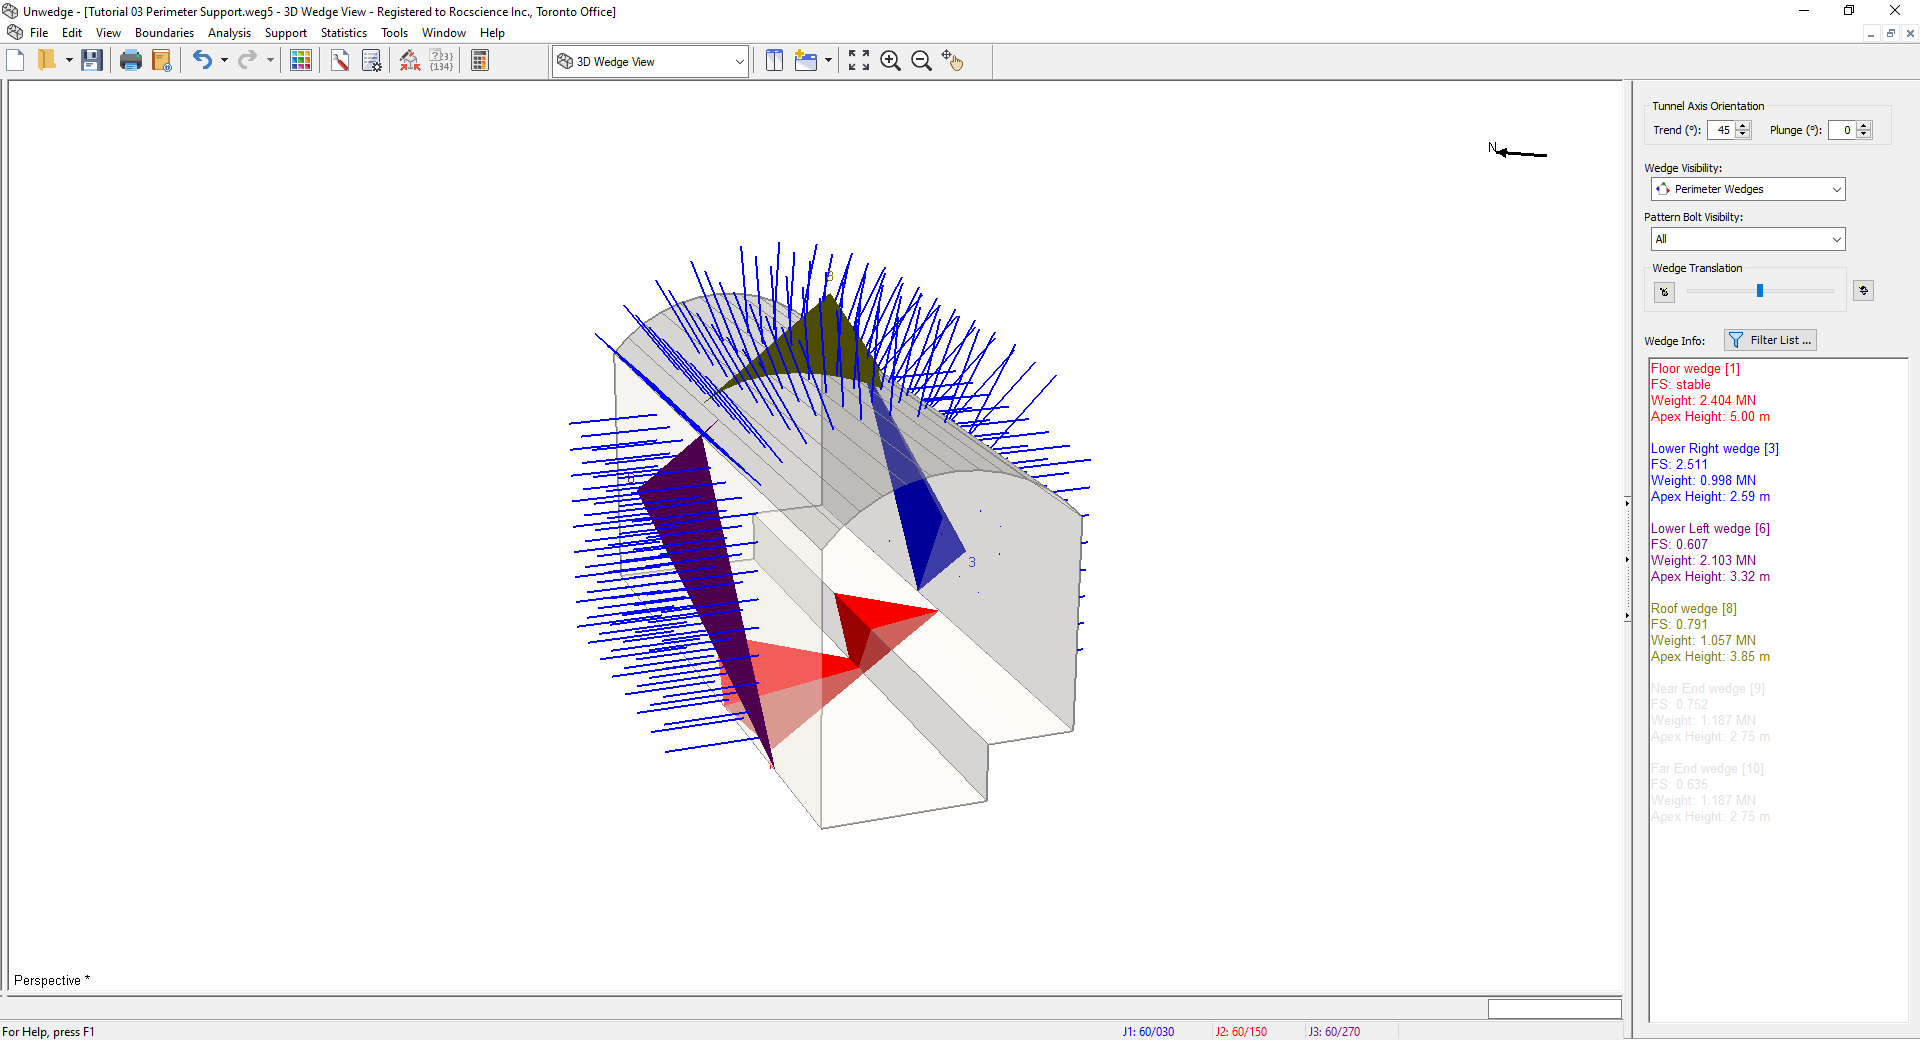 3D Wedge Model View